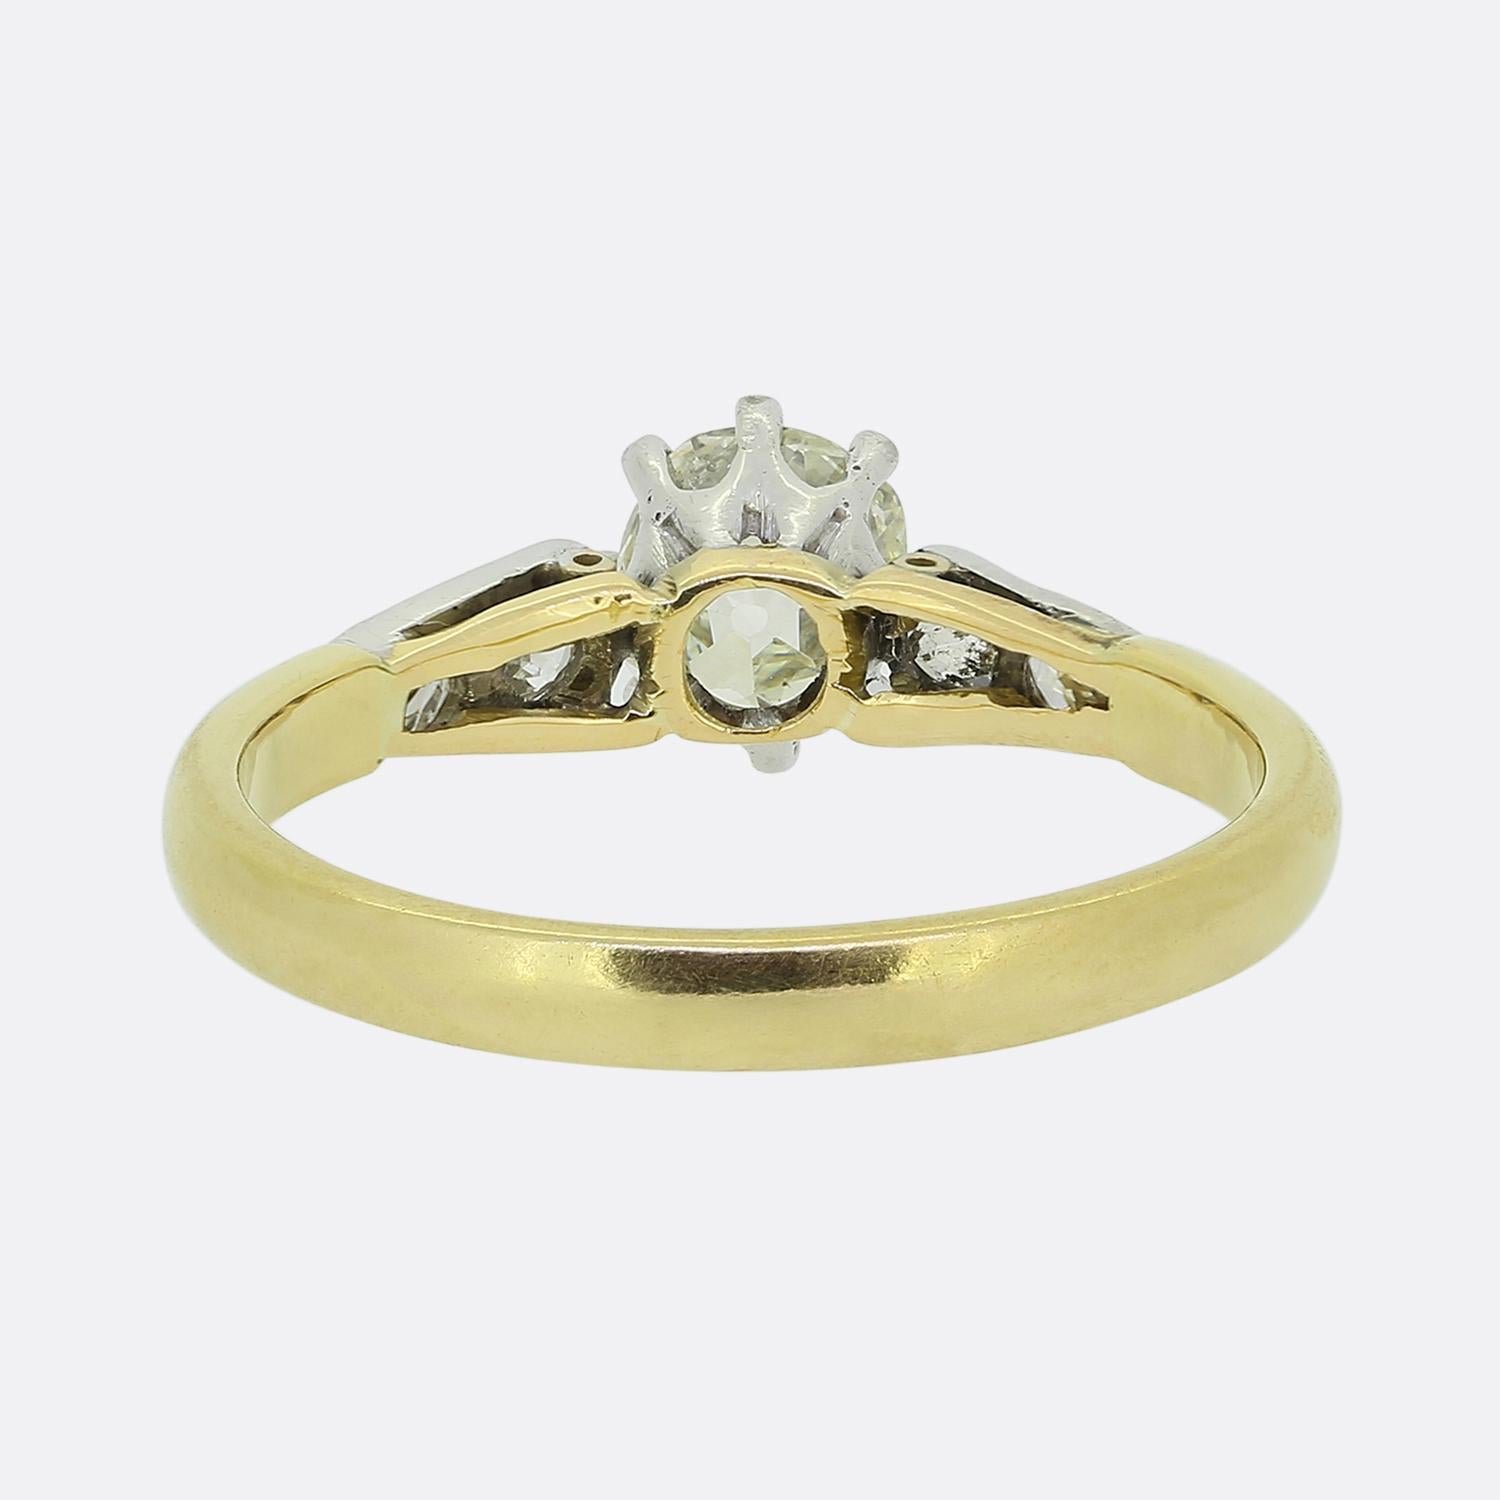 Edwardian 1.05 Carat Diamond Solitaire Engagement Ring In Good Condition For Sale In London, GB